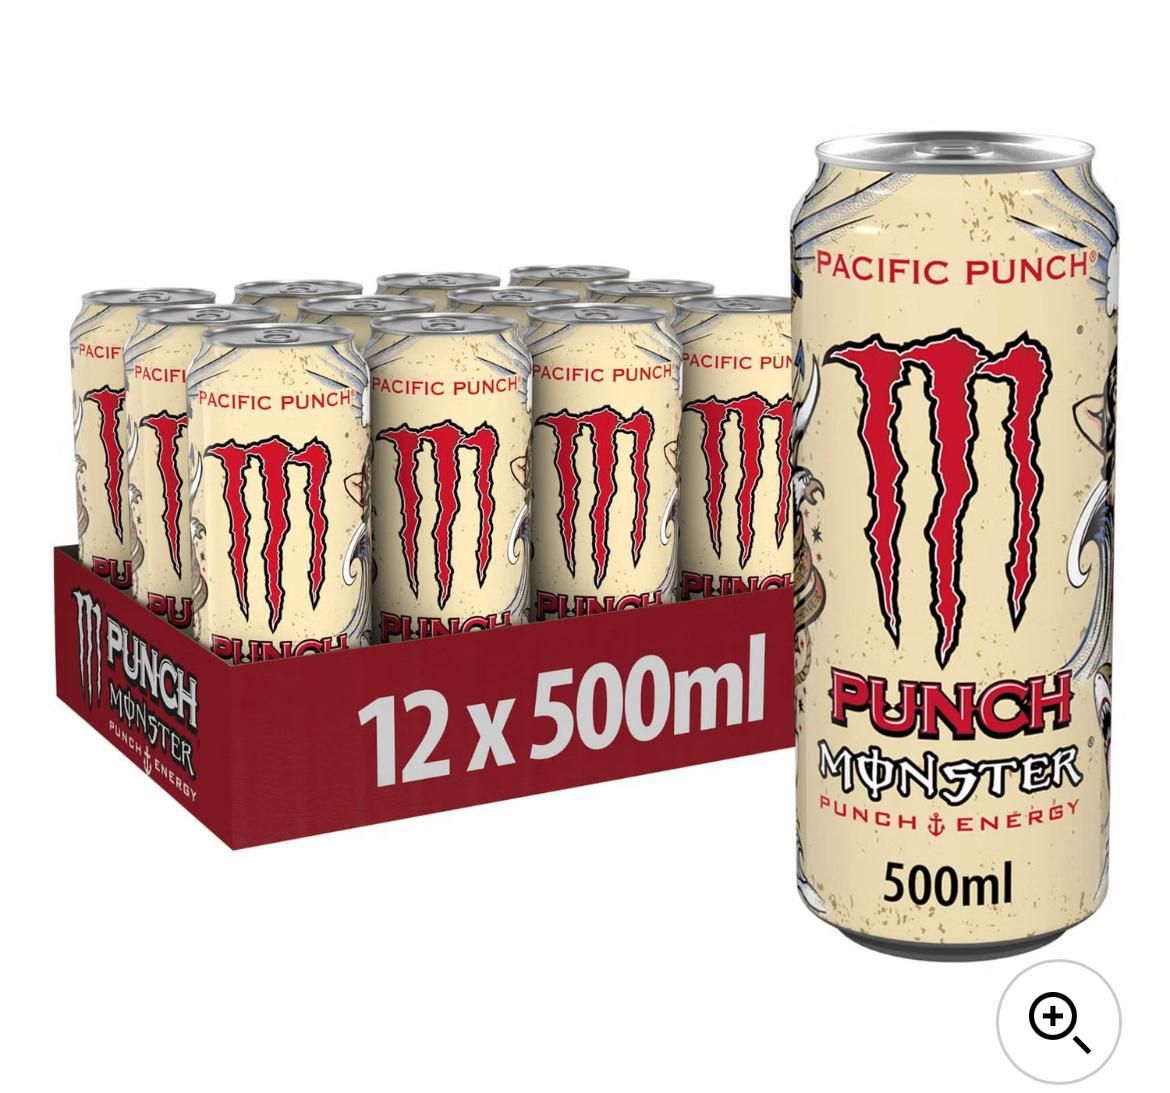 Monster pacific punch £1.49 pm 12x500ml BBE 02/25